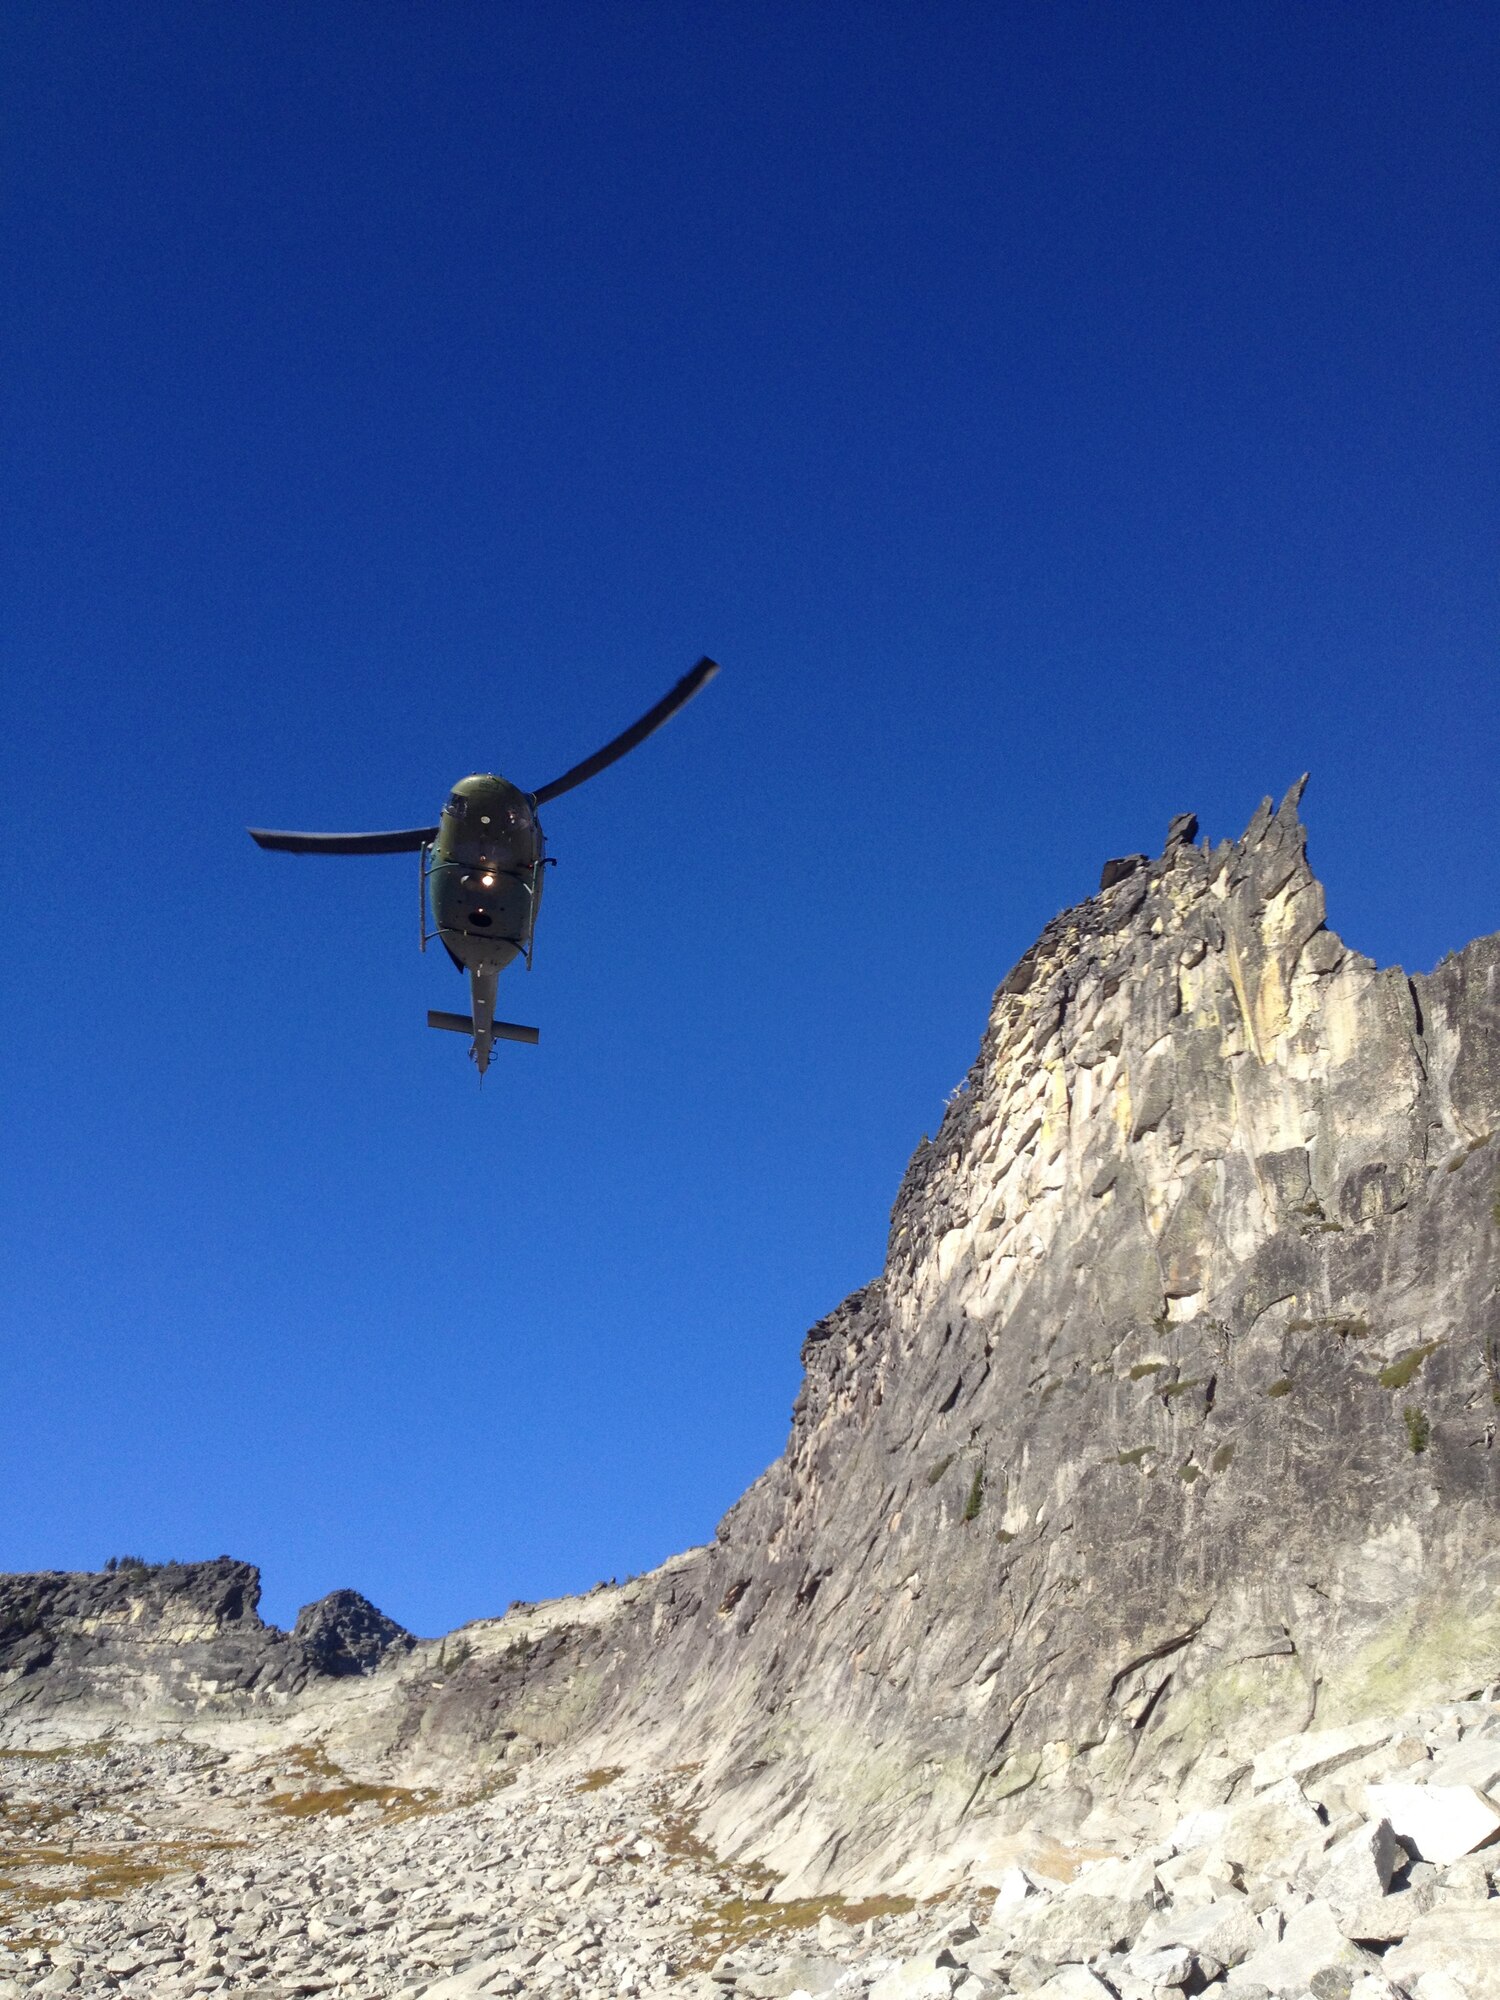 Fairchild Air Force Base crewmembers from 'Rescue 13' approach the scene of a rescue mission in their UH-1N Iroquois helicopter near Priest Lake, Idaho, Sept. 20, 2014. A 36-year-old female was entrapped by a 1.5 ton boulder while hiking in the area. The four-man crew extradited the victim out of the area after a ground crew managed to free her from the boulder. (Courtesy photo by Jason Luthy)